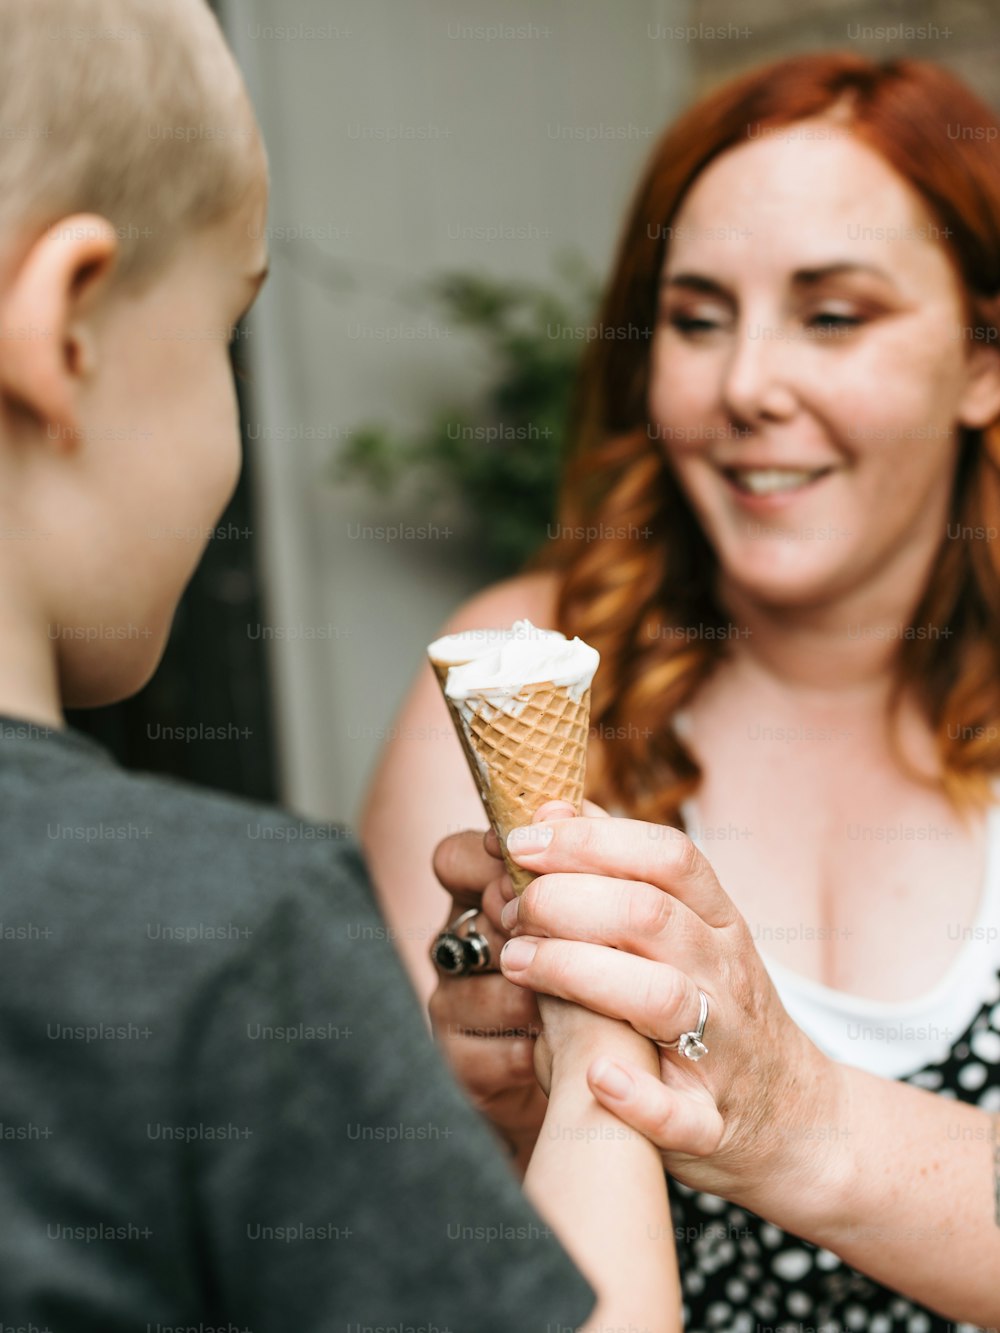 a woman holding an ice cream cone to a boy